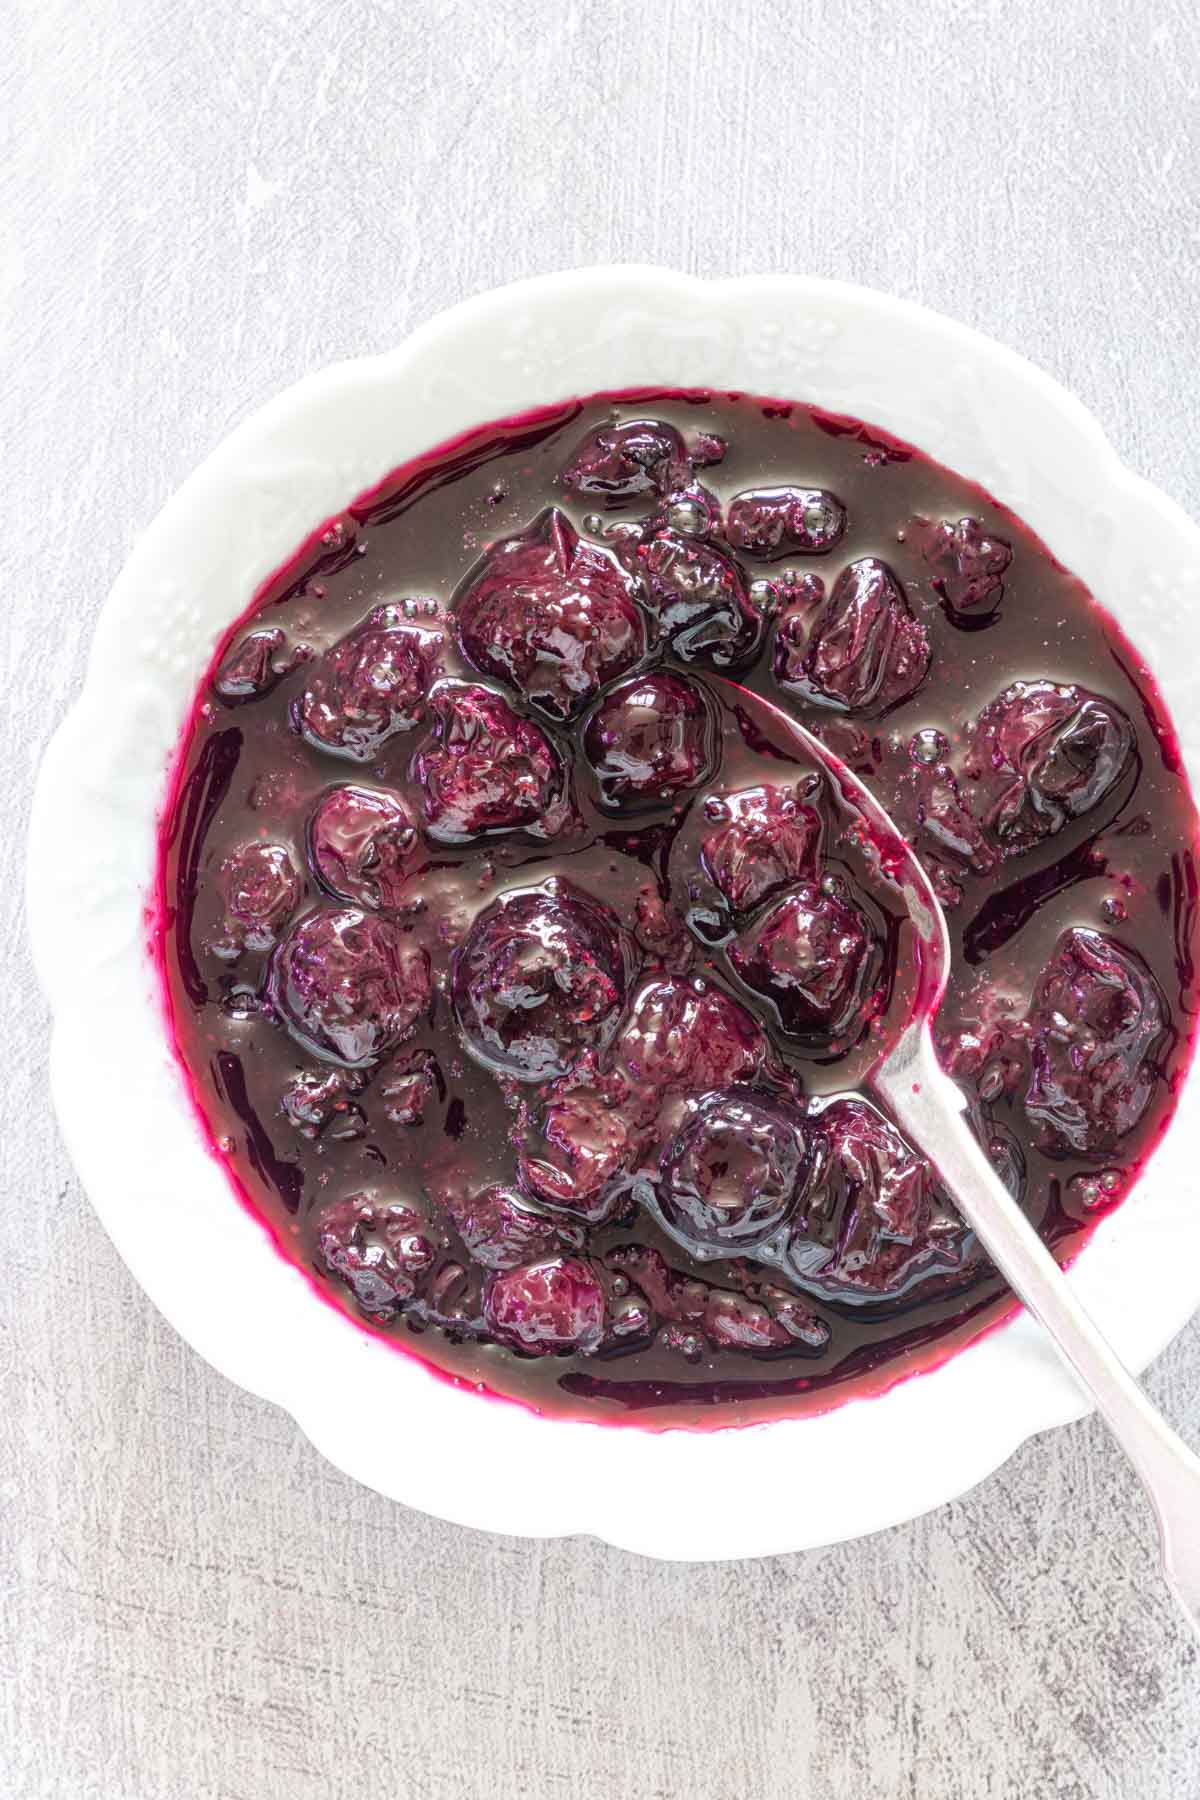 Blueberry Compote (Blueberry Sauce) + Instant Pot Blueberry Compote